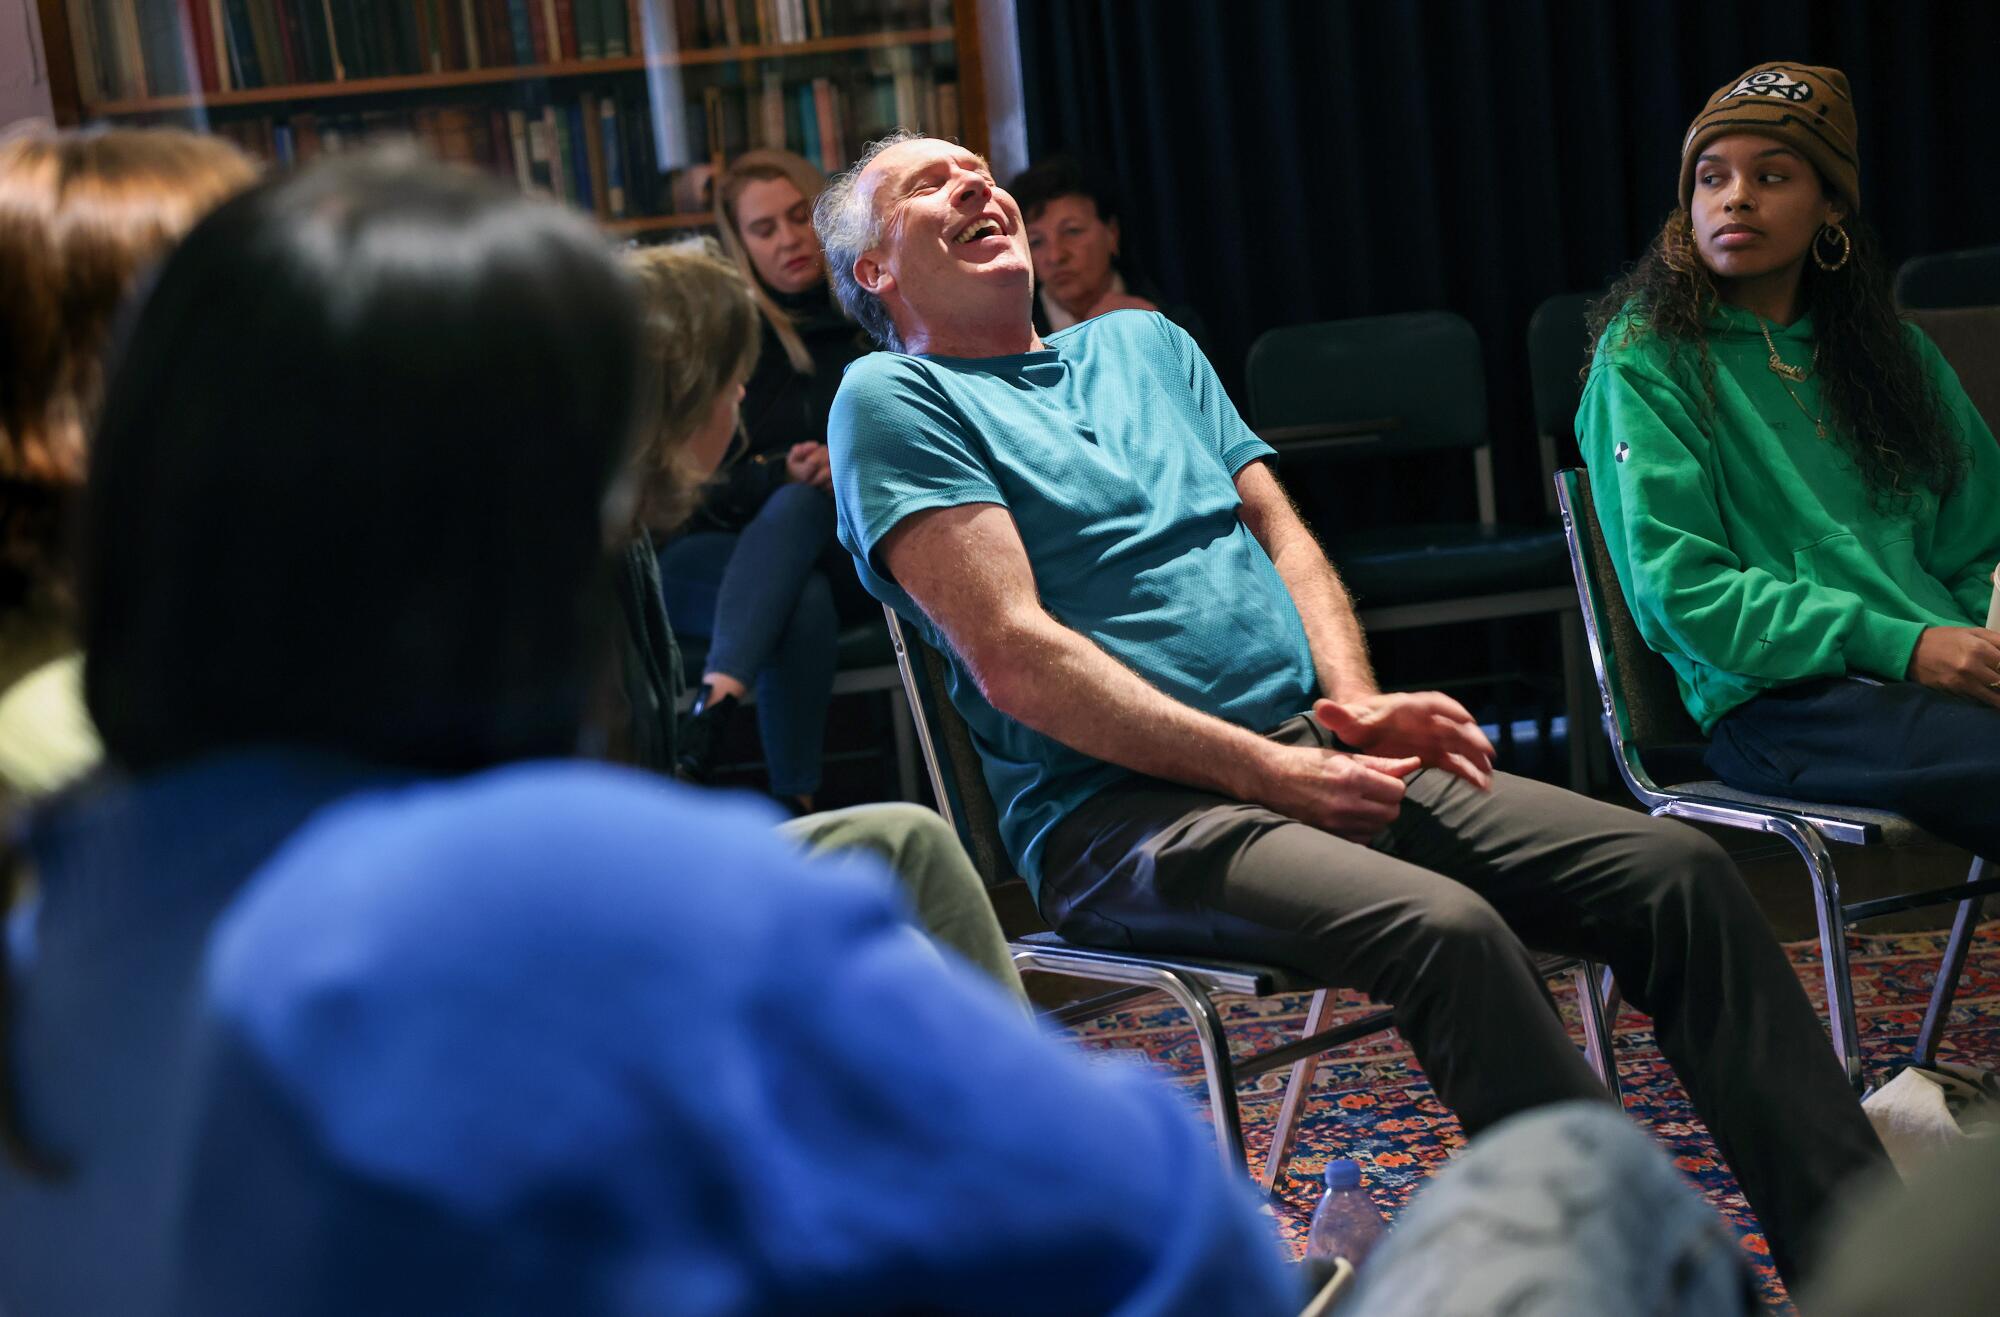 Michael Allison, 62, laughs a little while sharing with the group of participants in the death cafe.